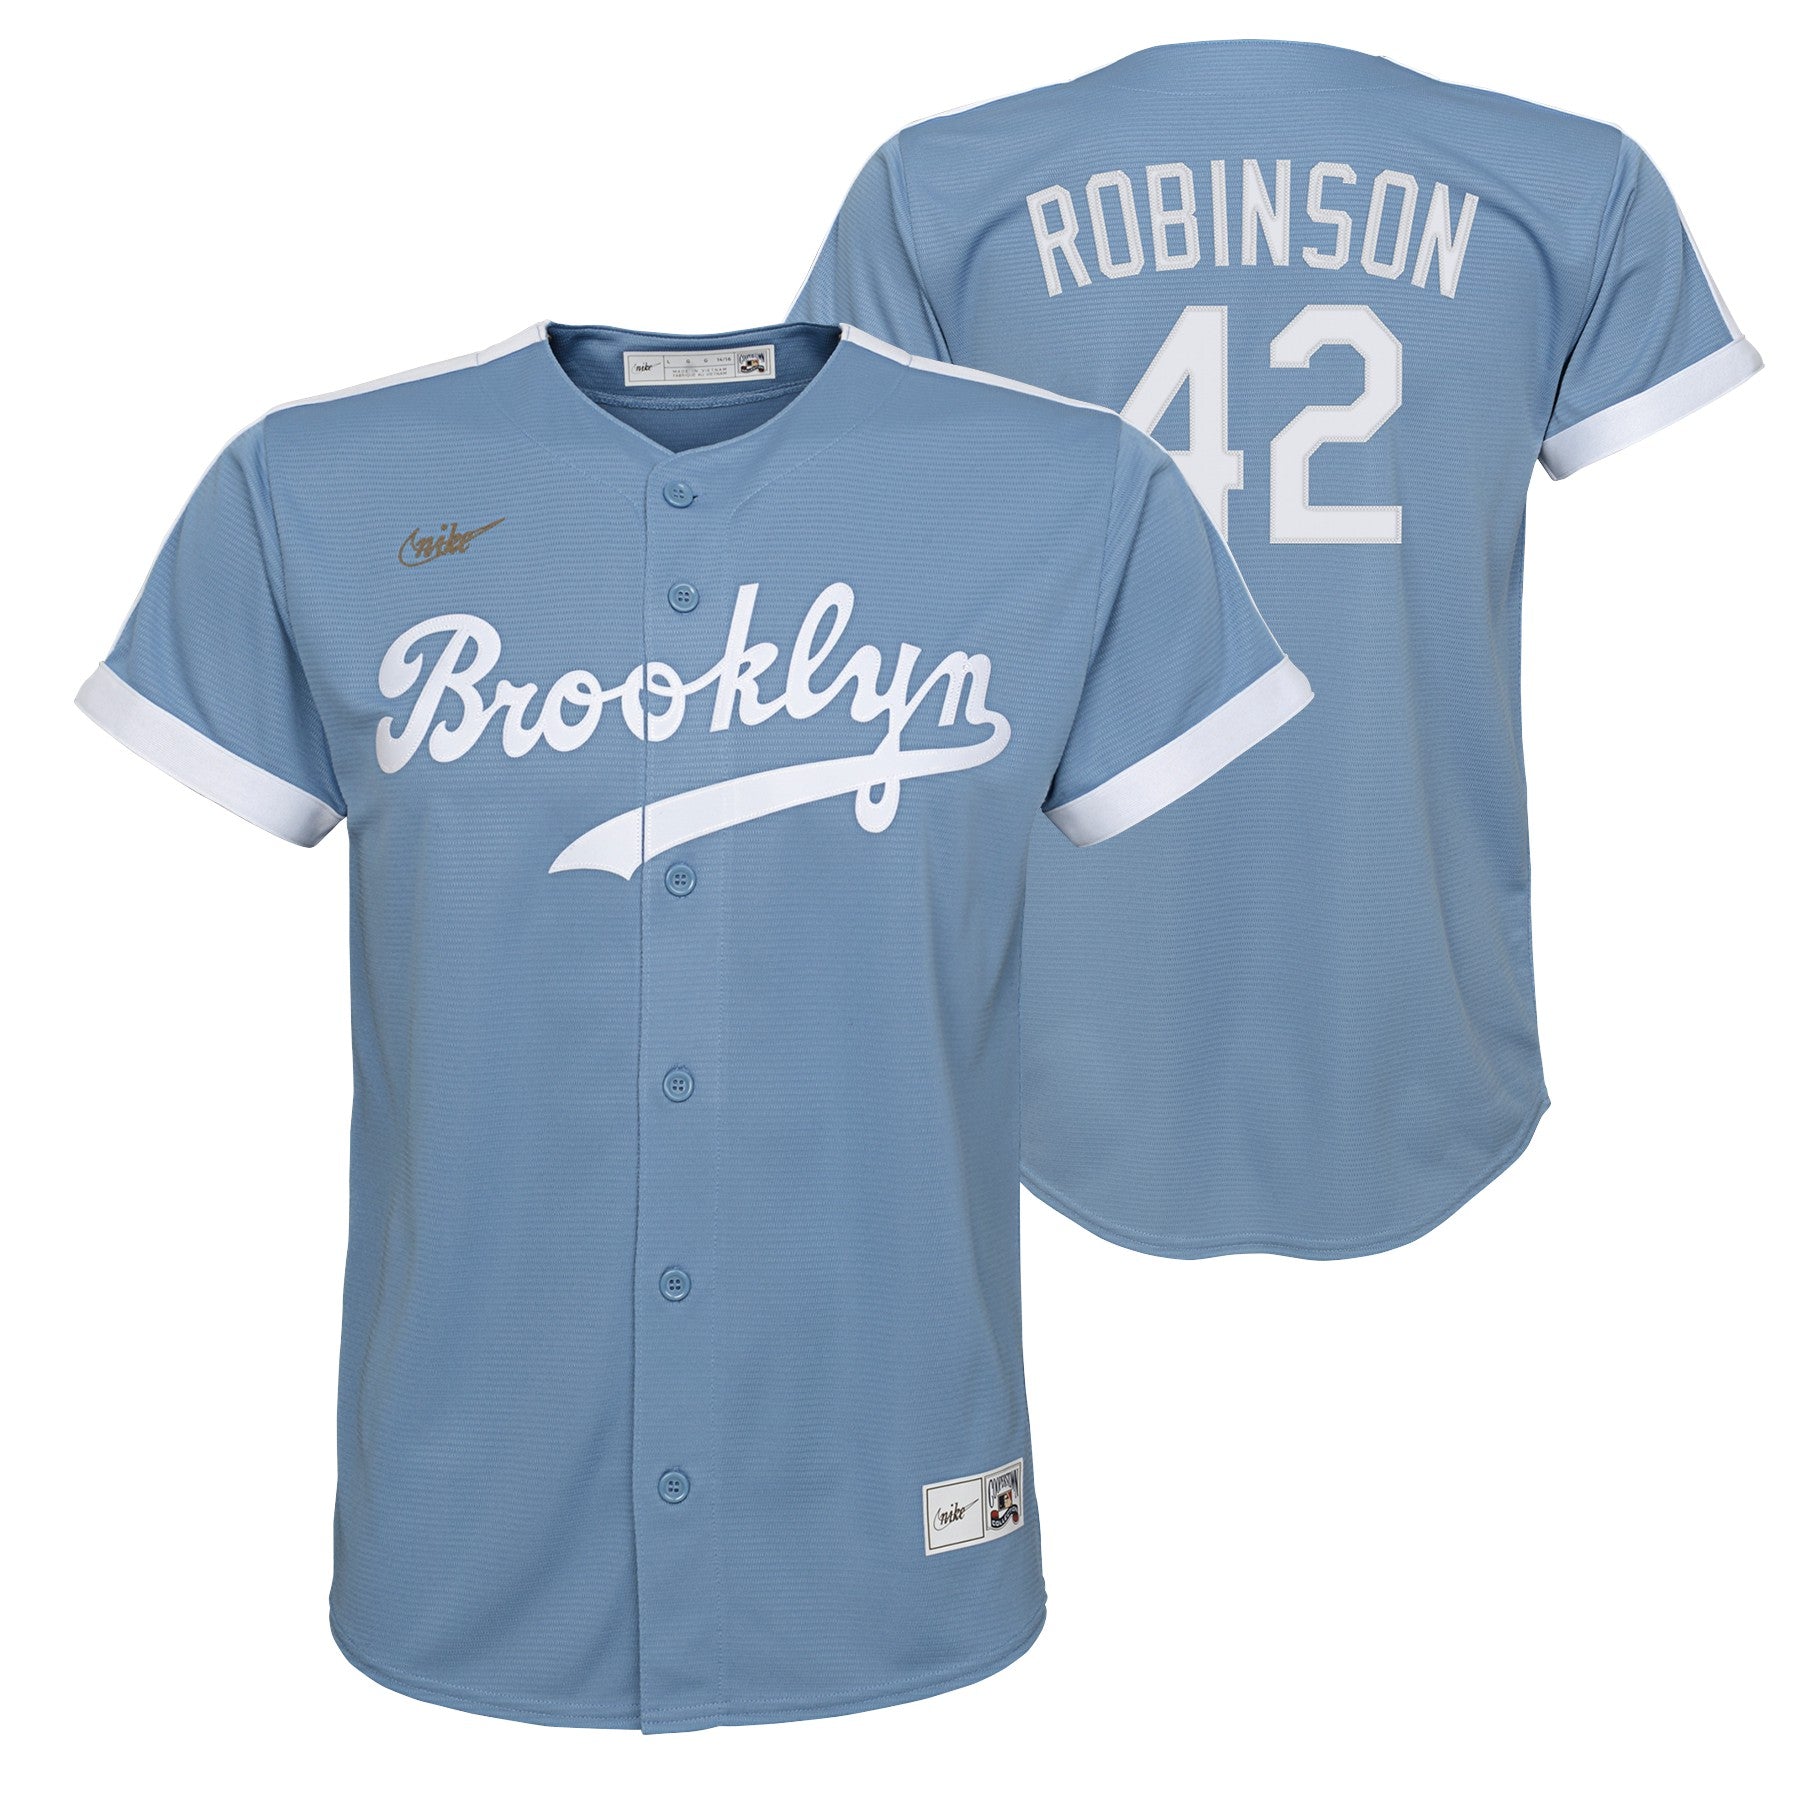 Jackie Robinson Boston Red Sox Nike Authentic Player Jersey - White